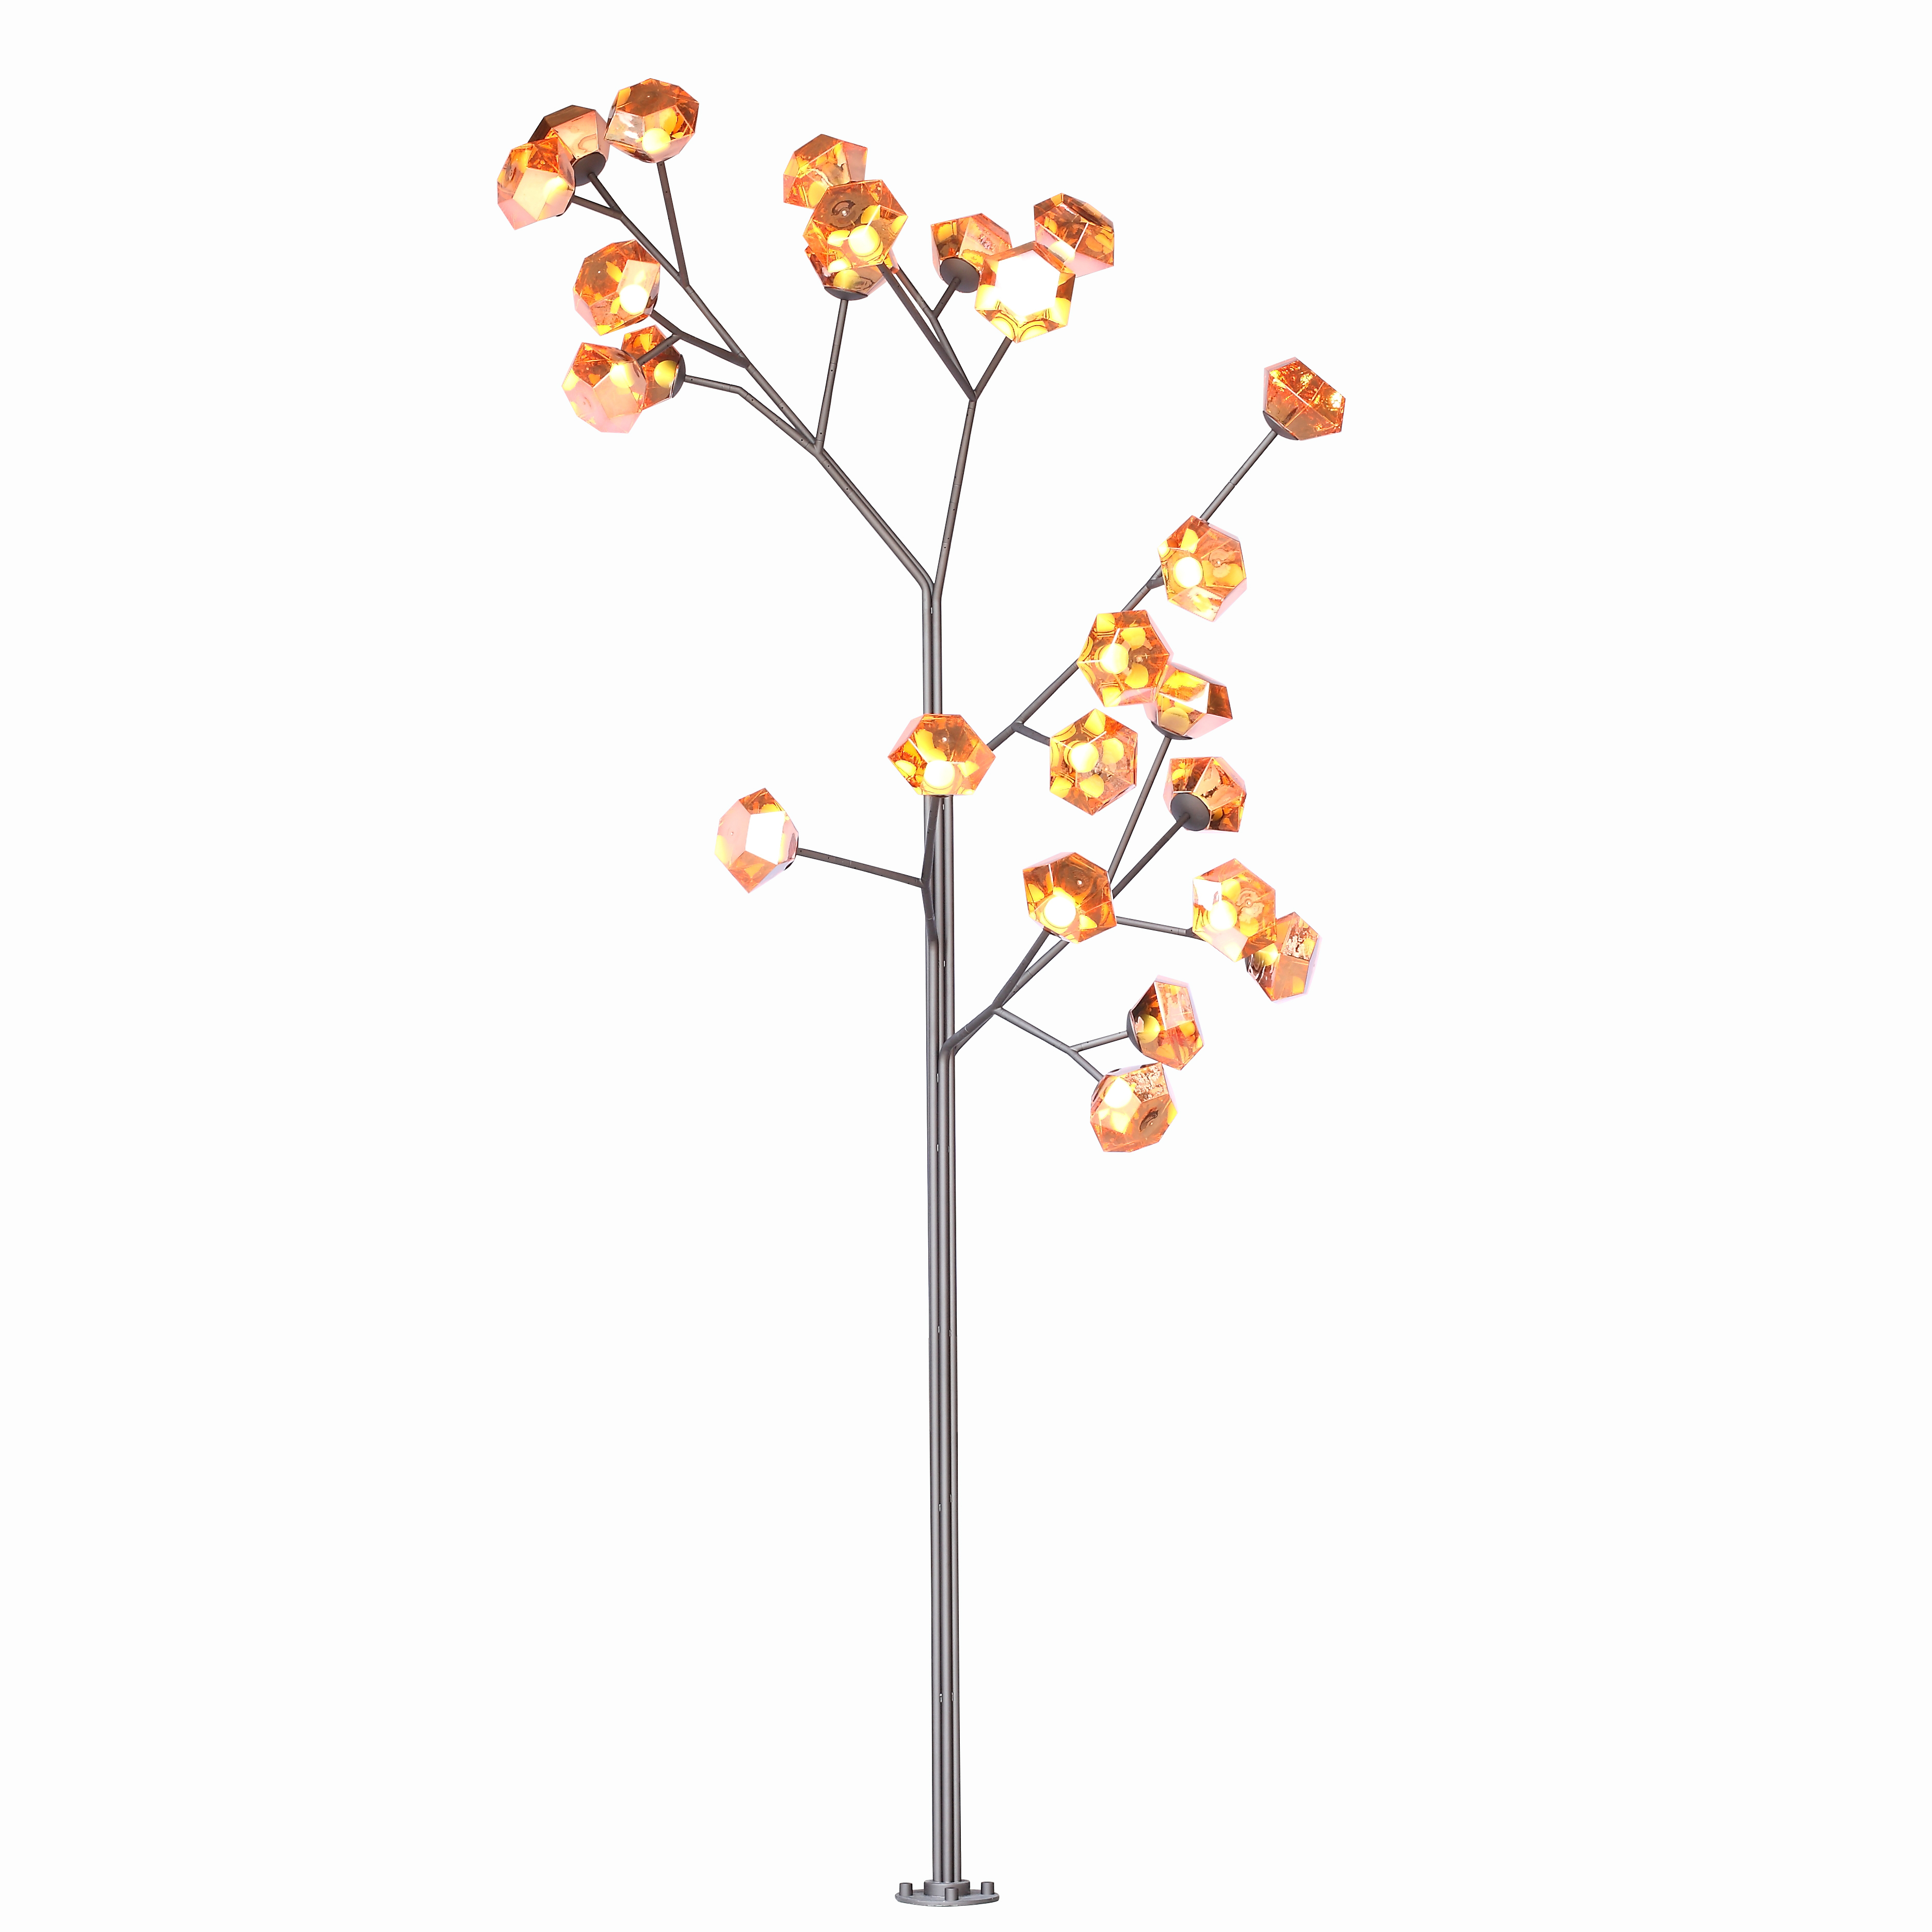 Quality Wholesale Tree of Life <a href='/floor-lamp/'>Floor Lamp</a>s: Factory-Direct Acrylic Shade Designs